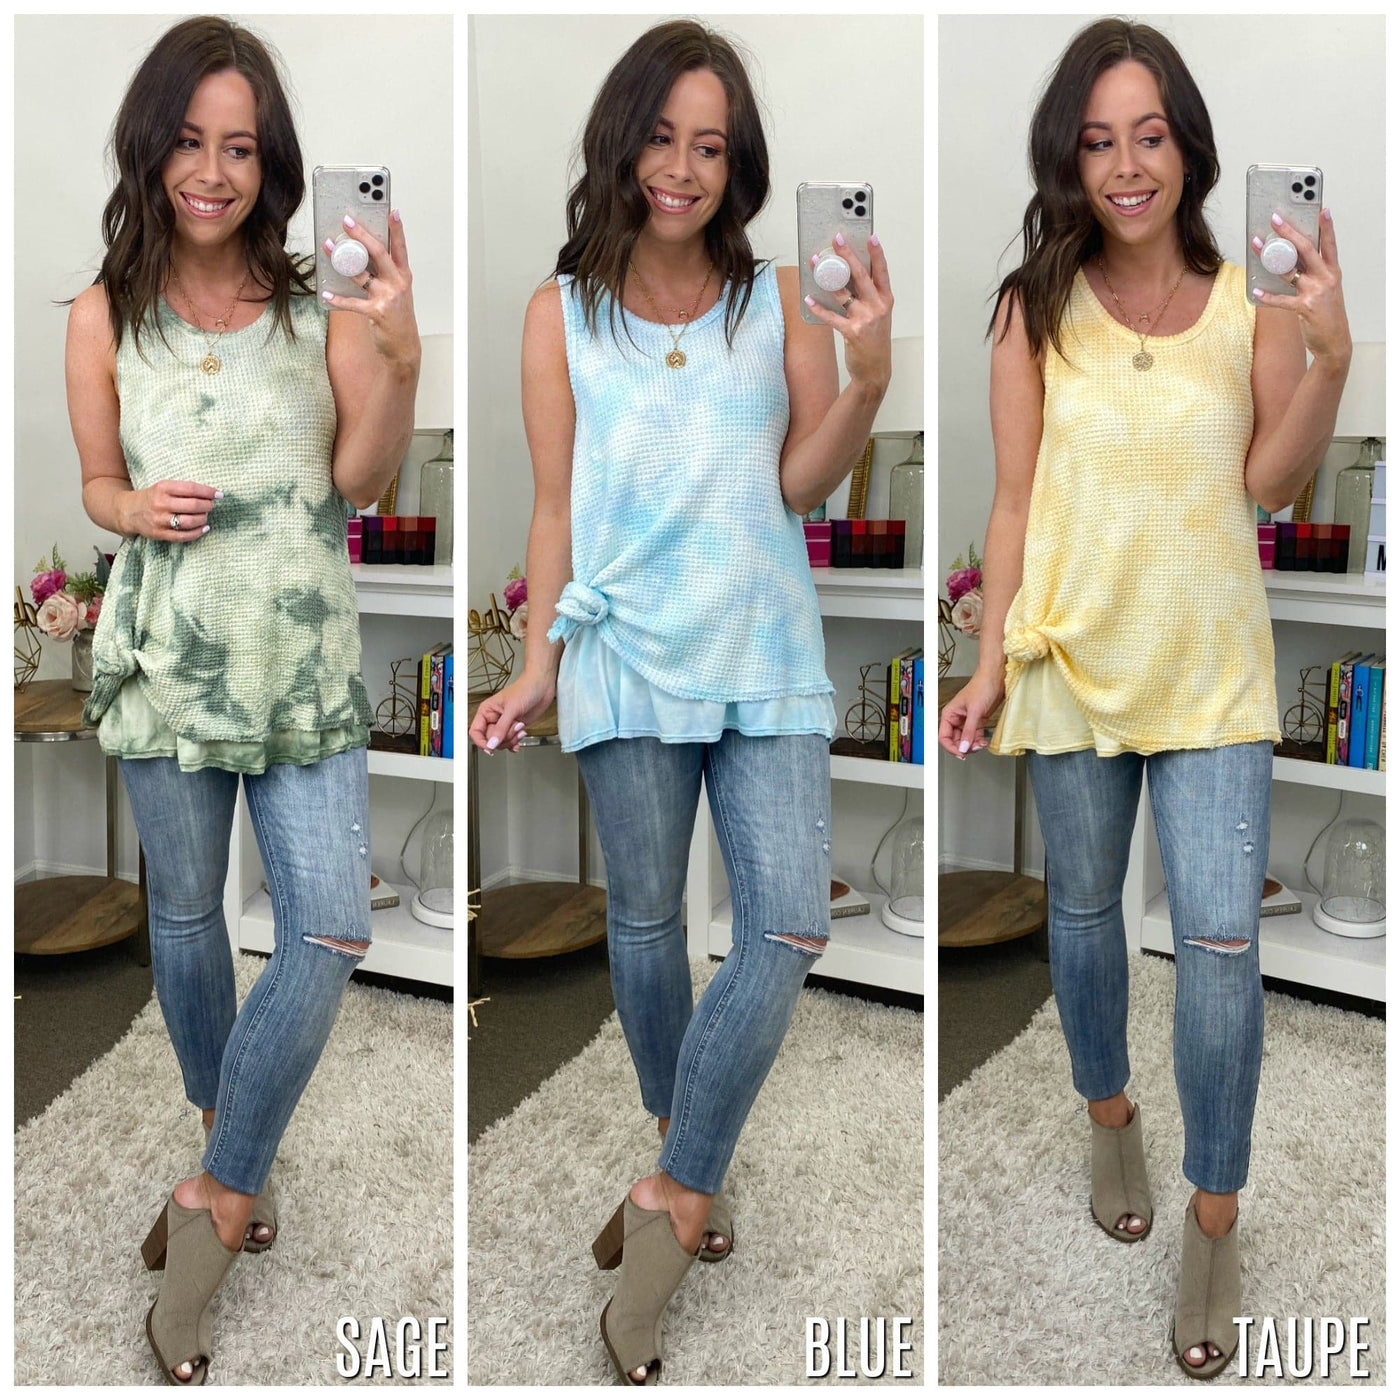  Corinna Tie Dye Knot Top - Madison and Mallory